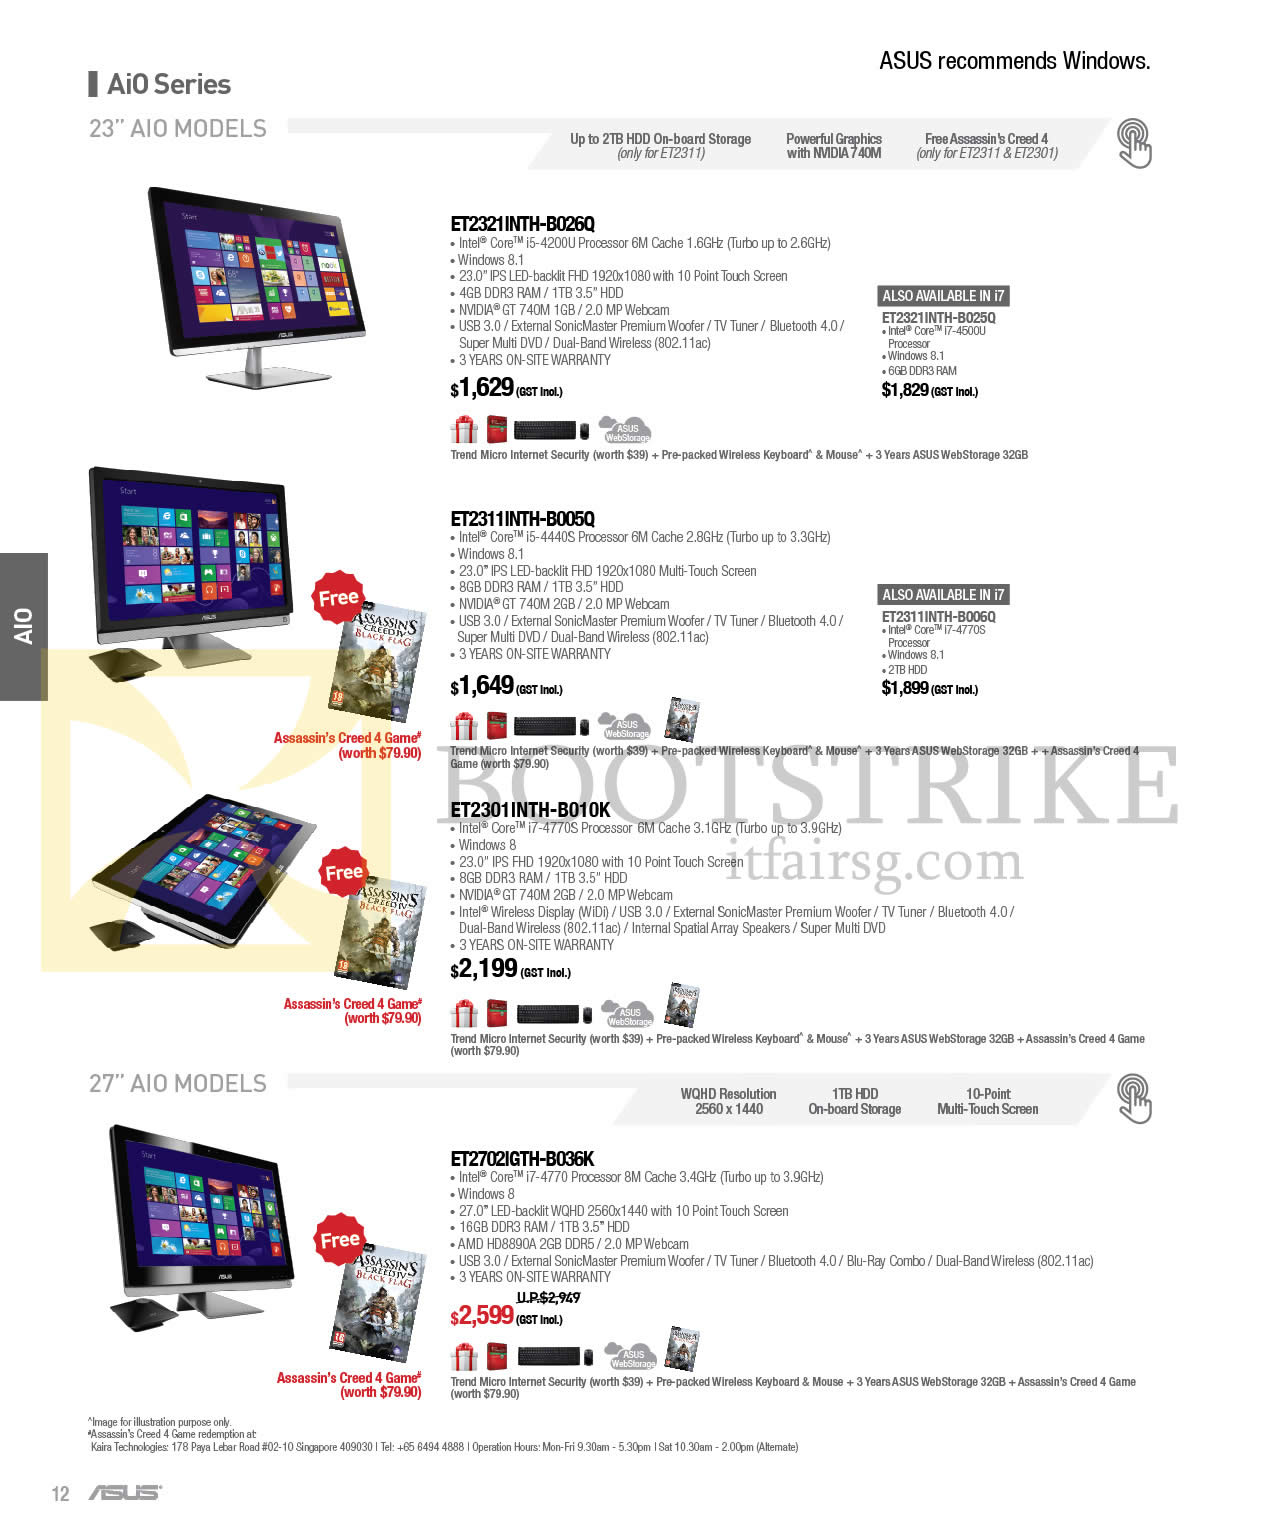 COMEX 2014 price list image brochure of ASUS AIO Desktop PCs ET2321INTH-B026Q, ET2321INTH-B0250, ET2311INTH-B005Q, B006Q, ET2301INTH-B010K, ET2702IGTH-B036K